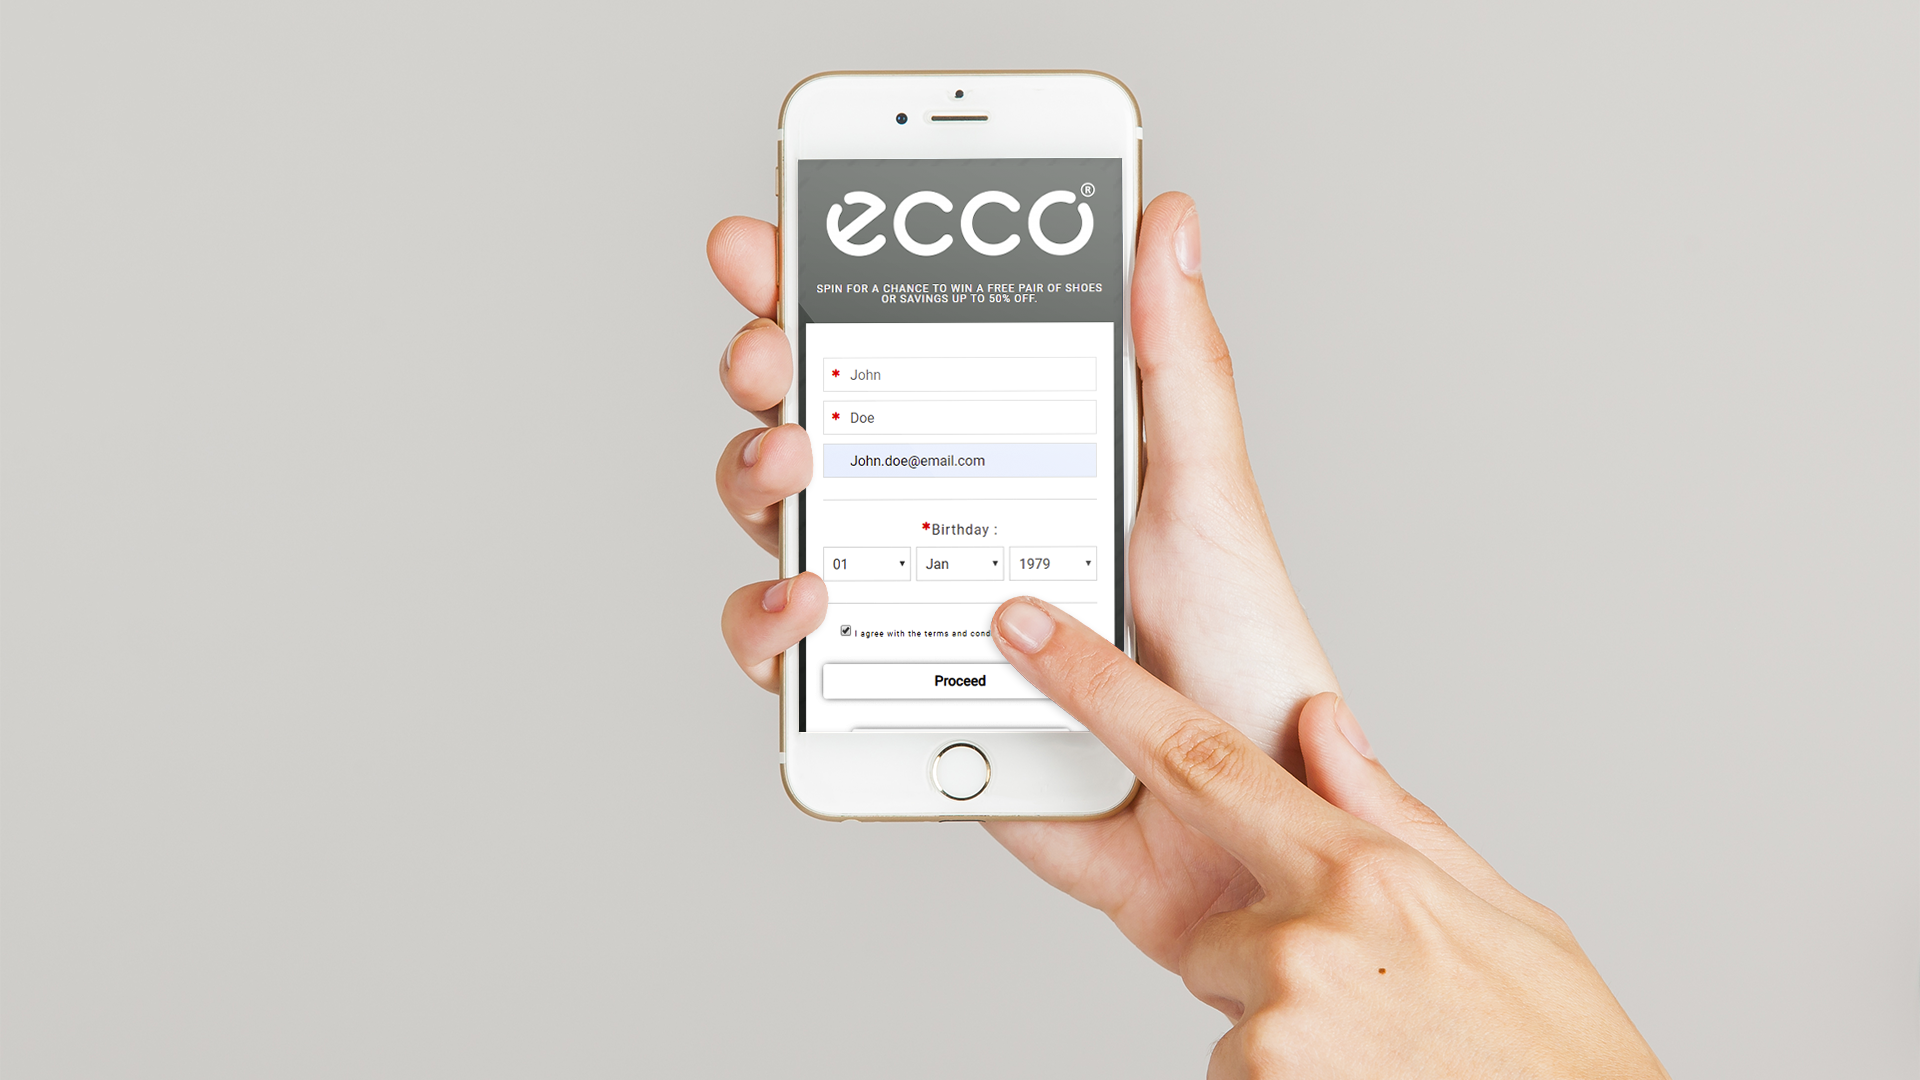 ecco in-store gamification  use case image